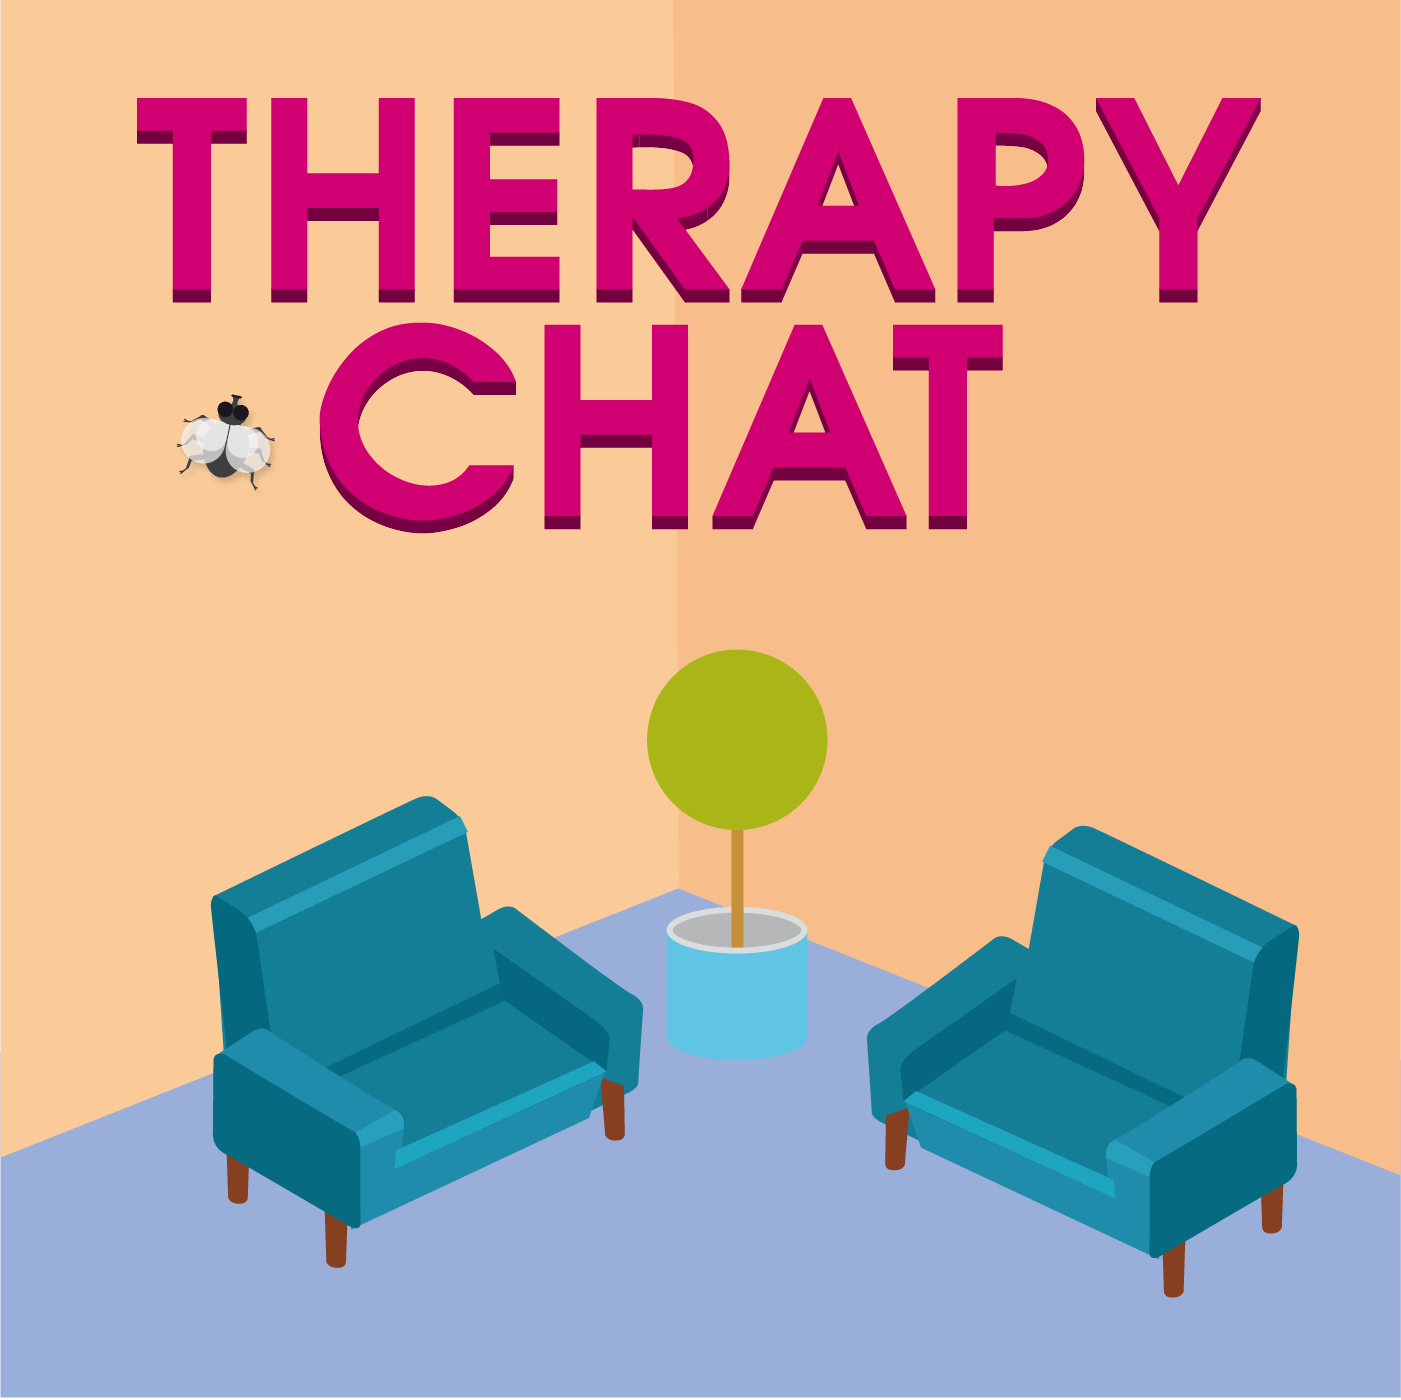 326: Therapeutic Gaming And Nerd Culture with Charlene Macpherson